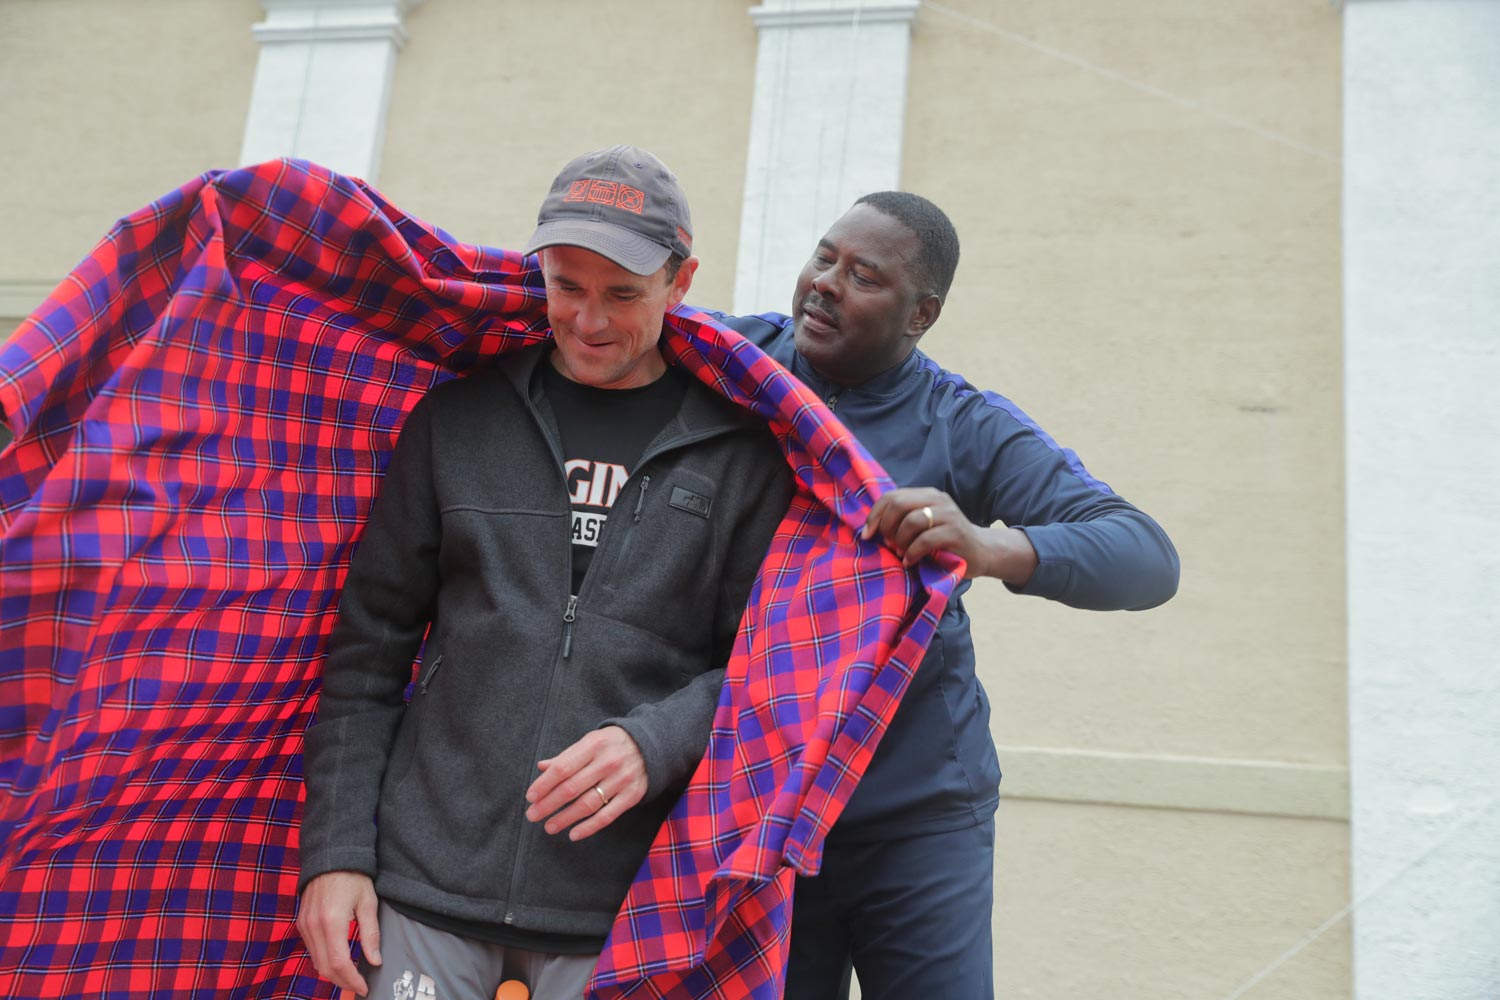 Paul Ereng presented President Ryan with a blanket